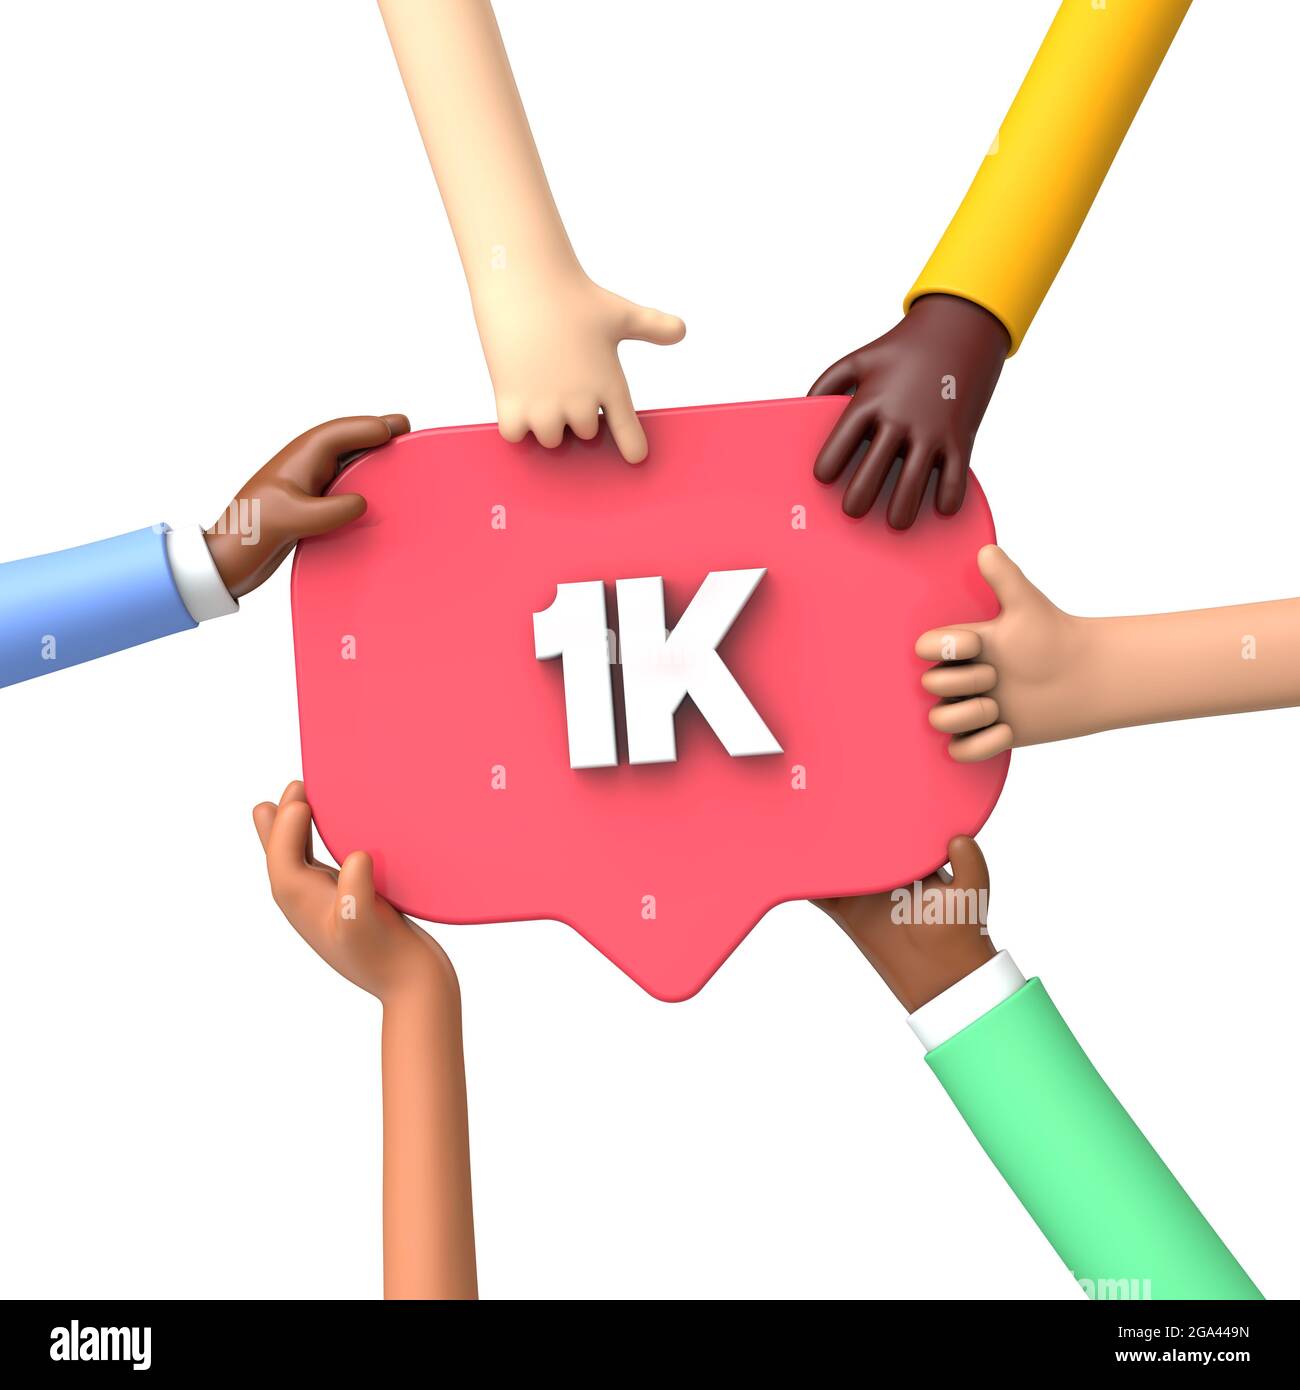 Hands holding a 1k social media followers banner label. 3D Rendering Stock Photo